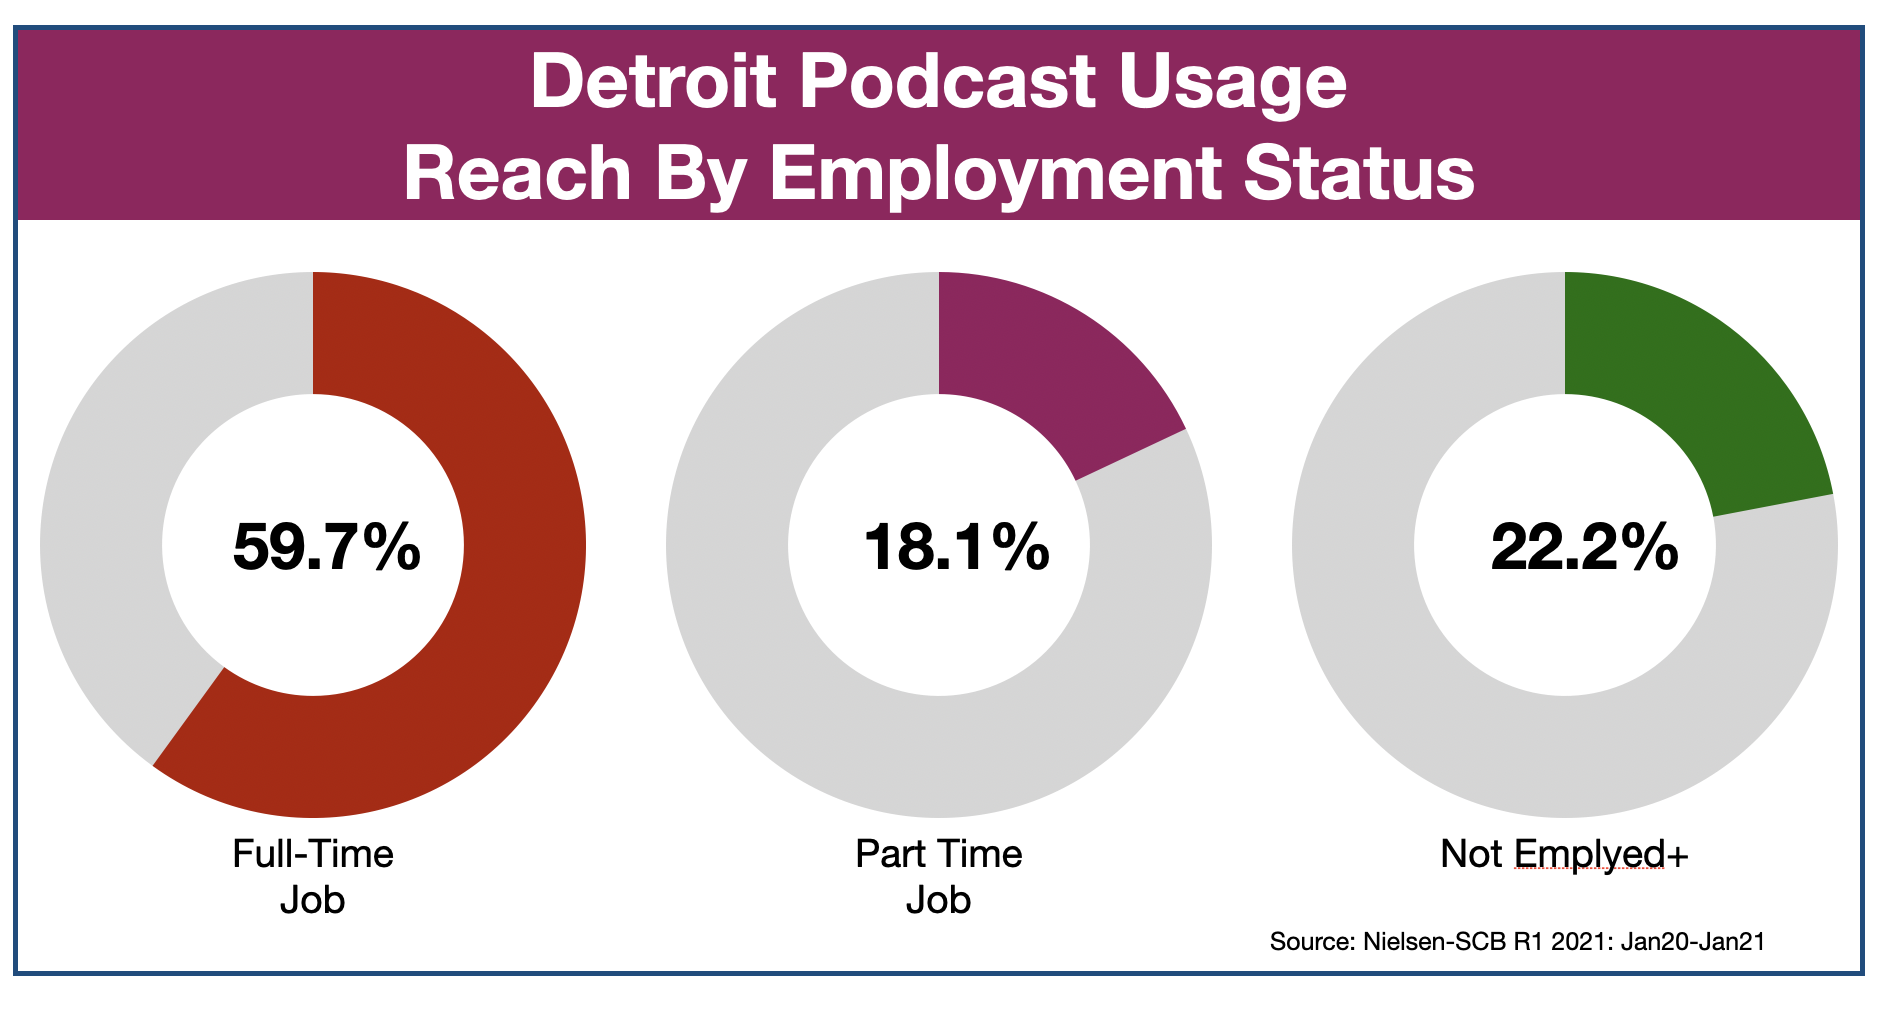 Podcast Advertising In Detroit: Employment